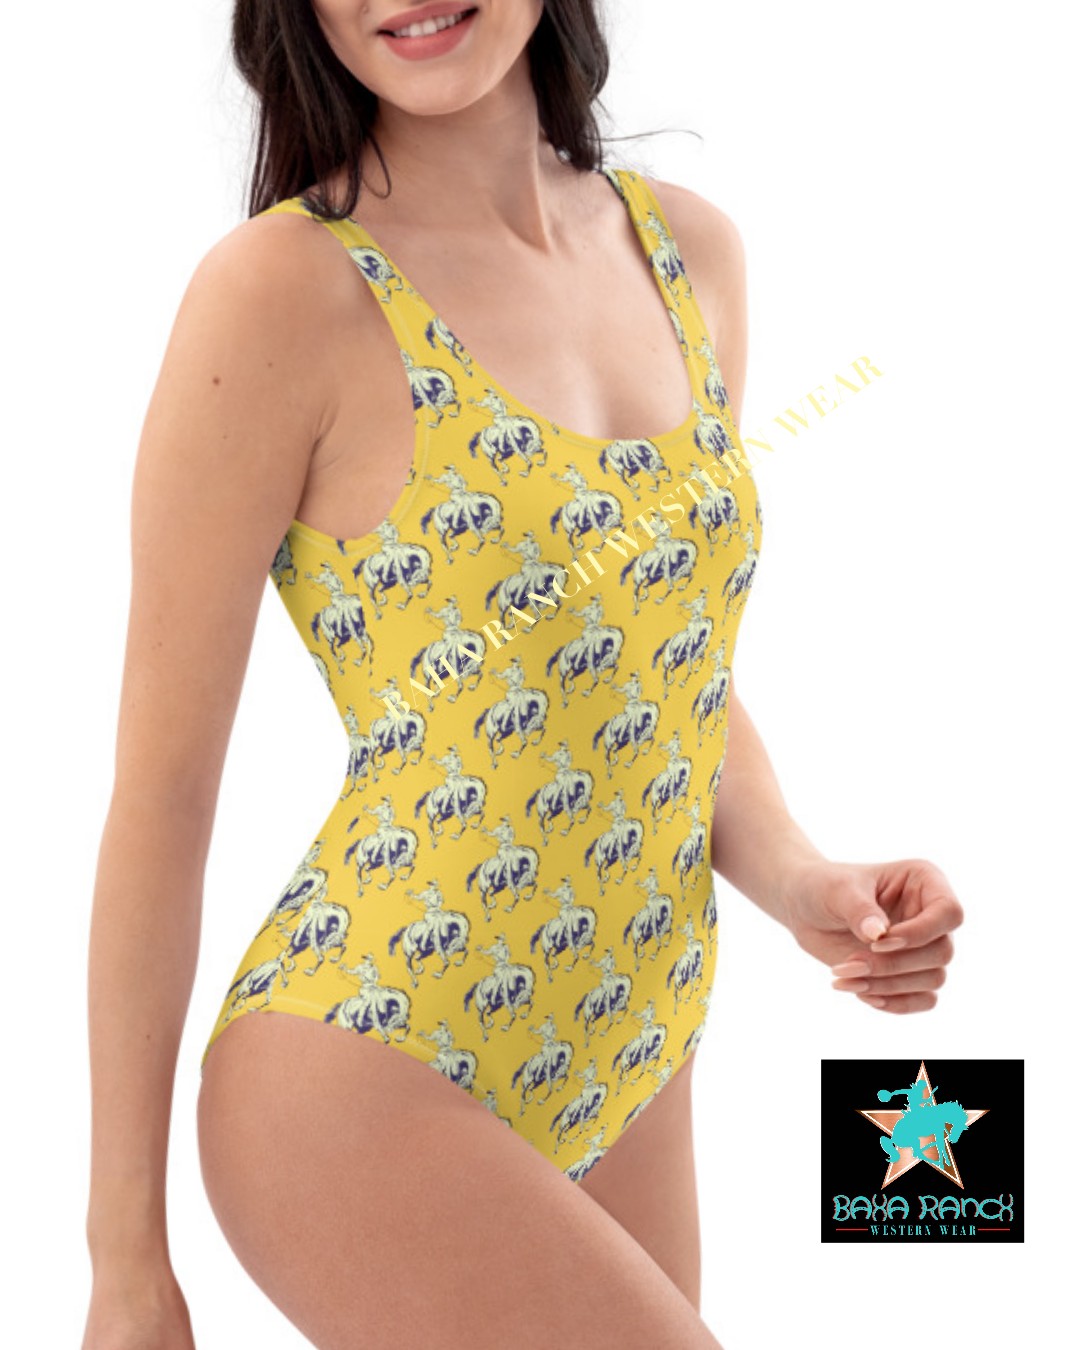 Yeehaw Vintage Bronc Buster One-Piece Swimsuit - #beach, #one-piece, #onepiece, #op, #swim, #swimming, #swimsuit, beaches, bronc, bronc buster, pool, swimsui, vintage -  - Baha Ranch Western Wear